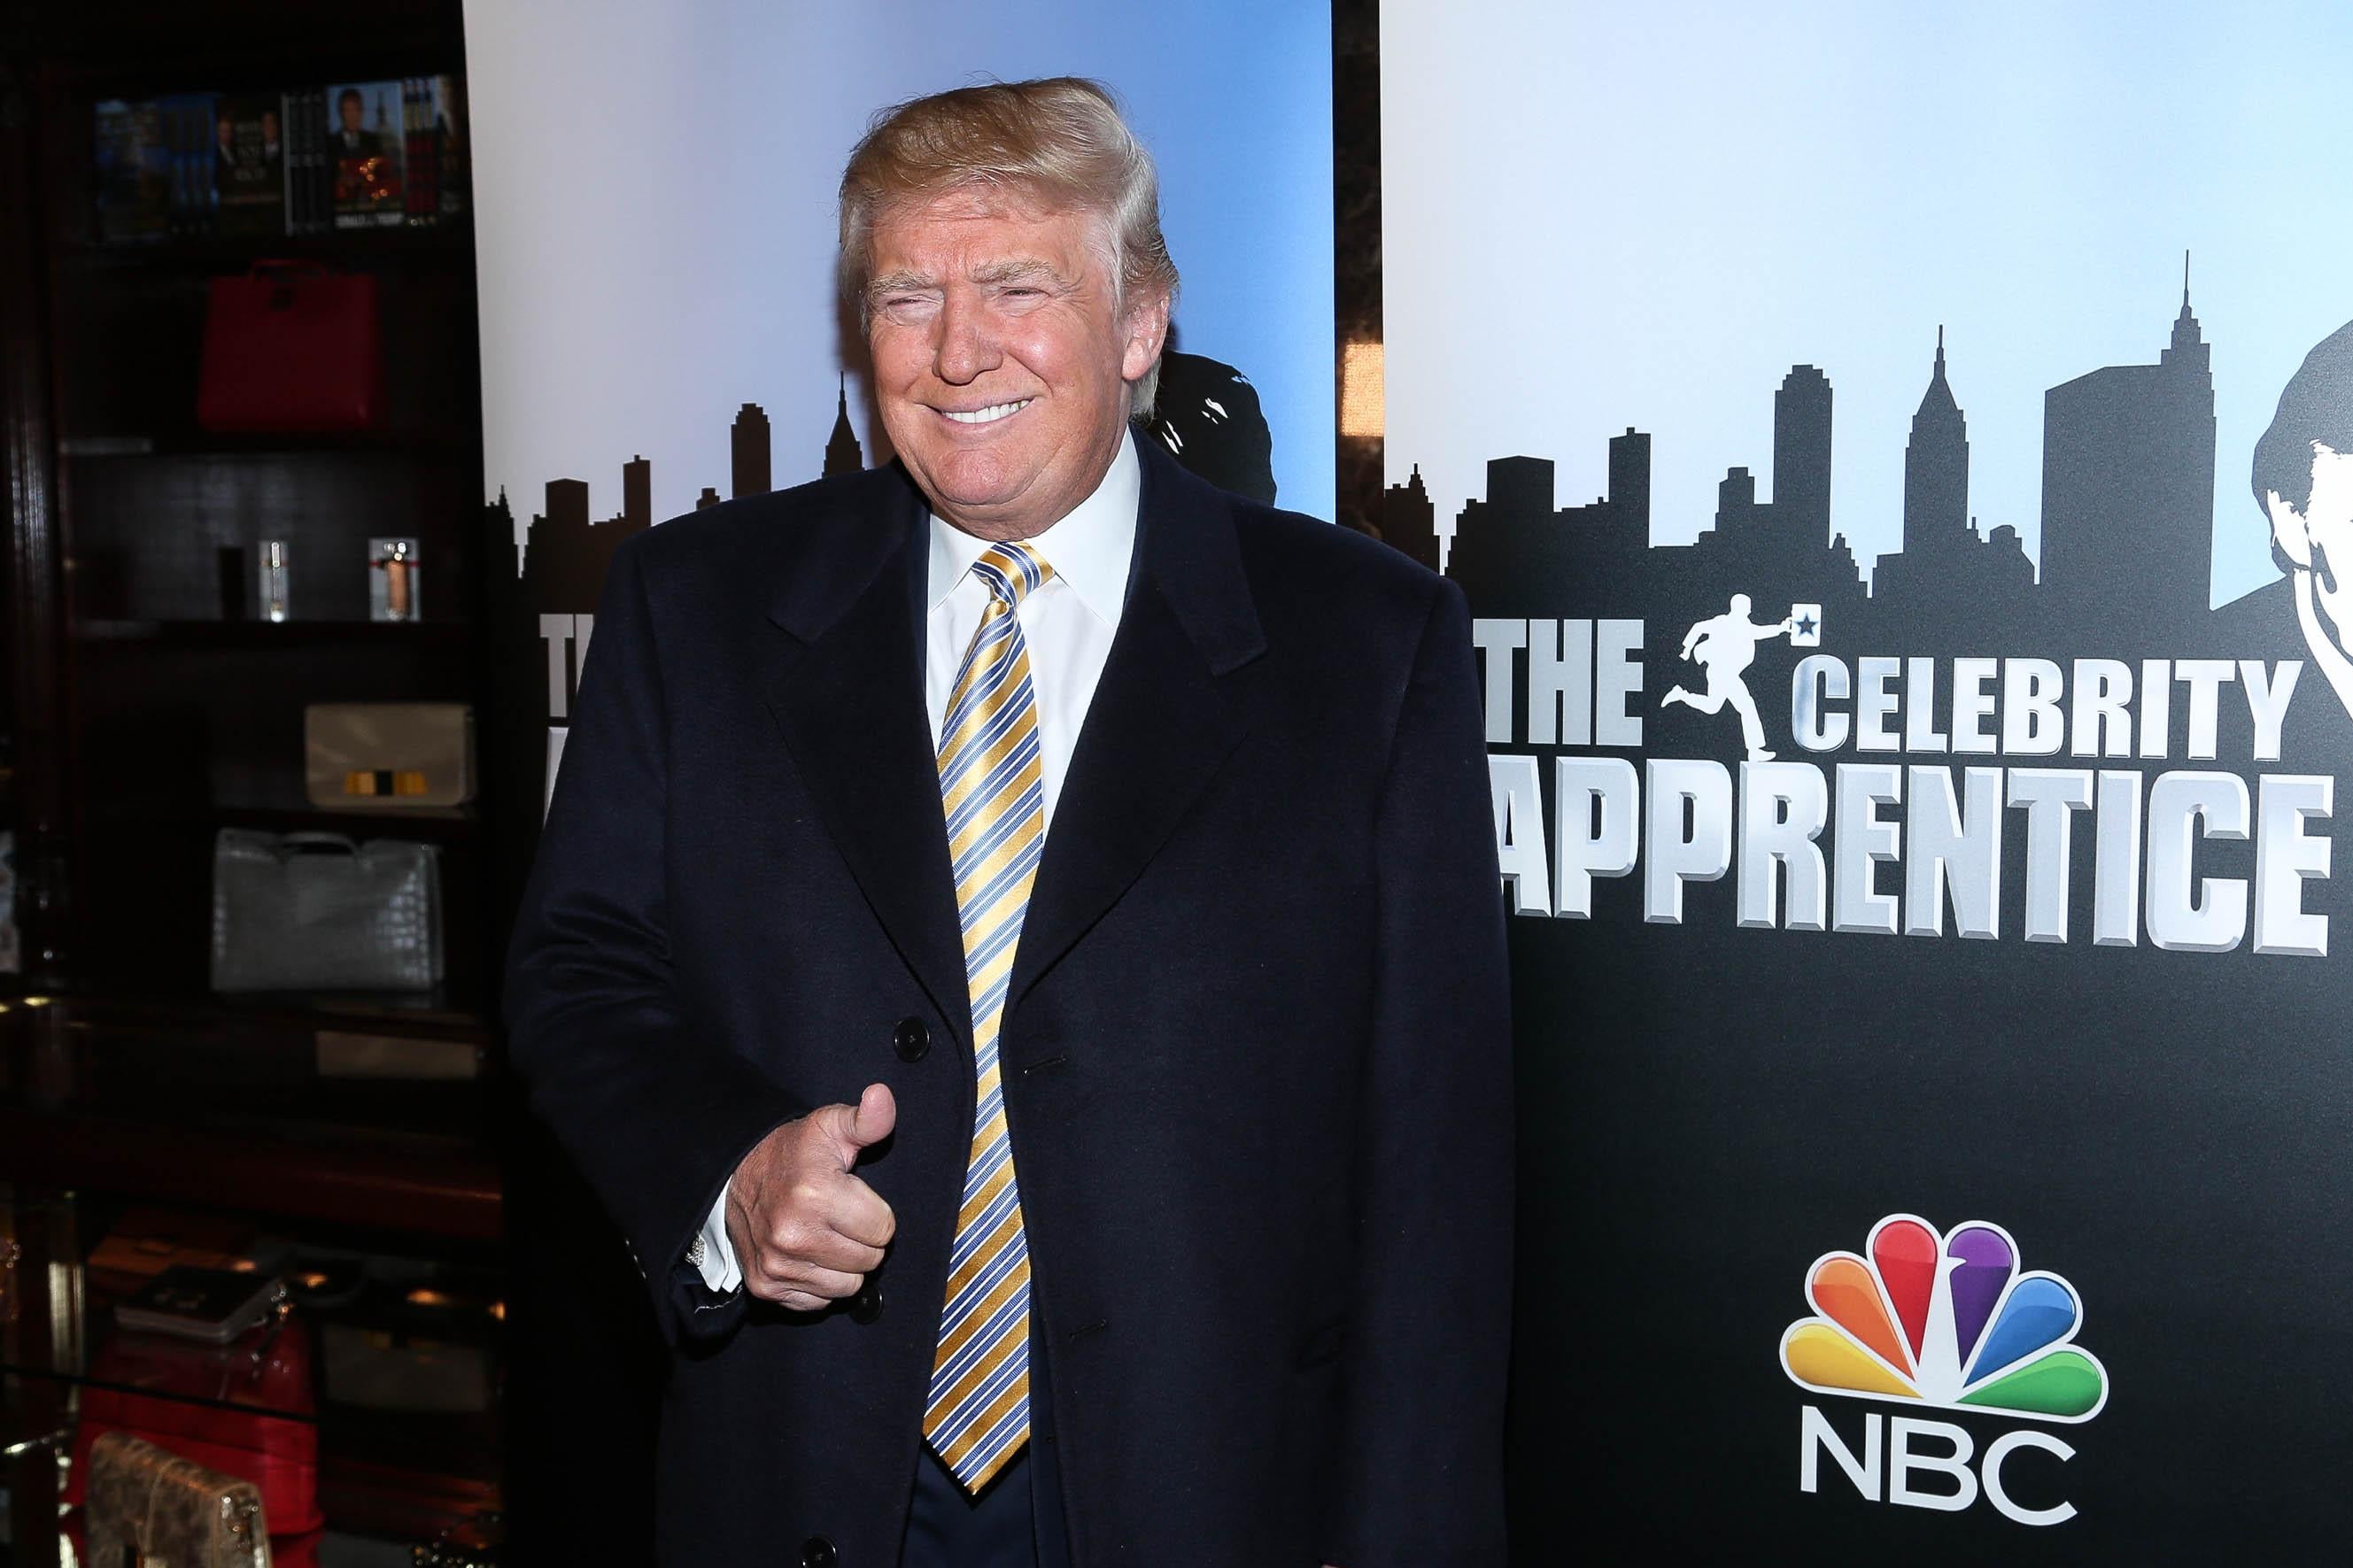 Donald Trump attends Celebrity Apprentice Red Carpet Event at Trump Tower on January 20, 2015 in New York City. 